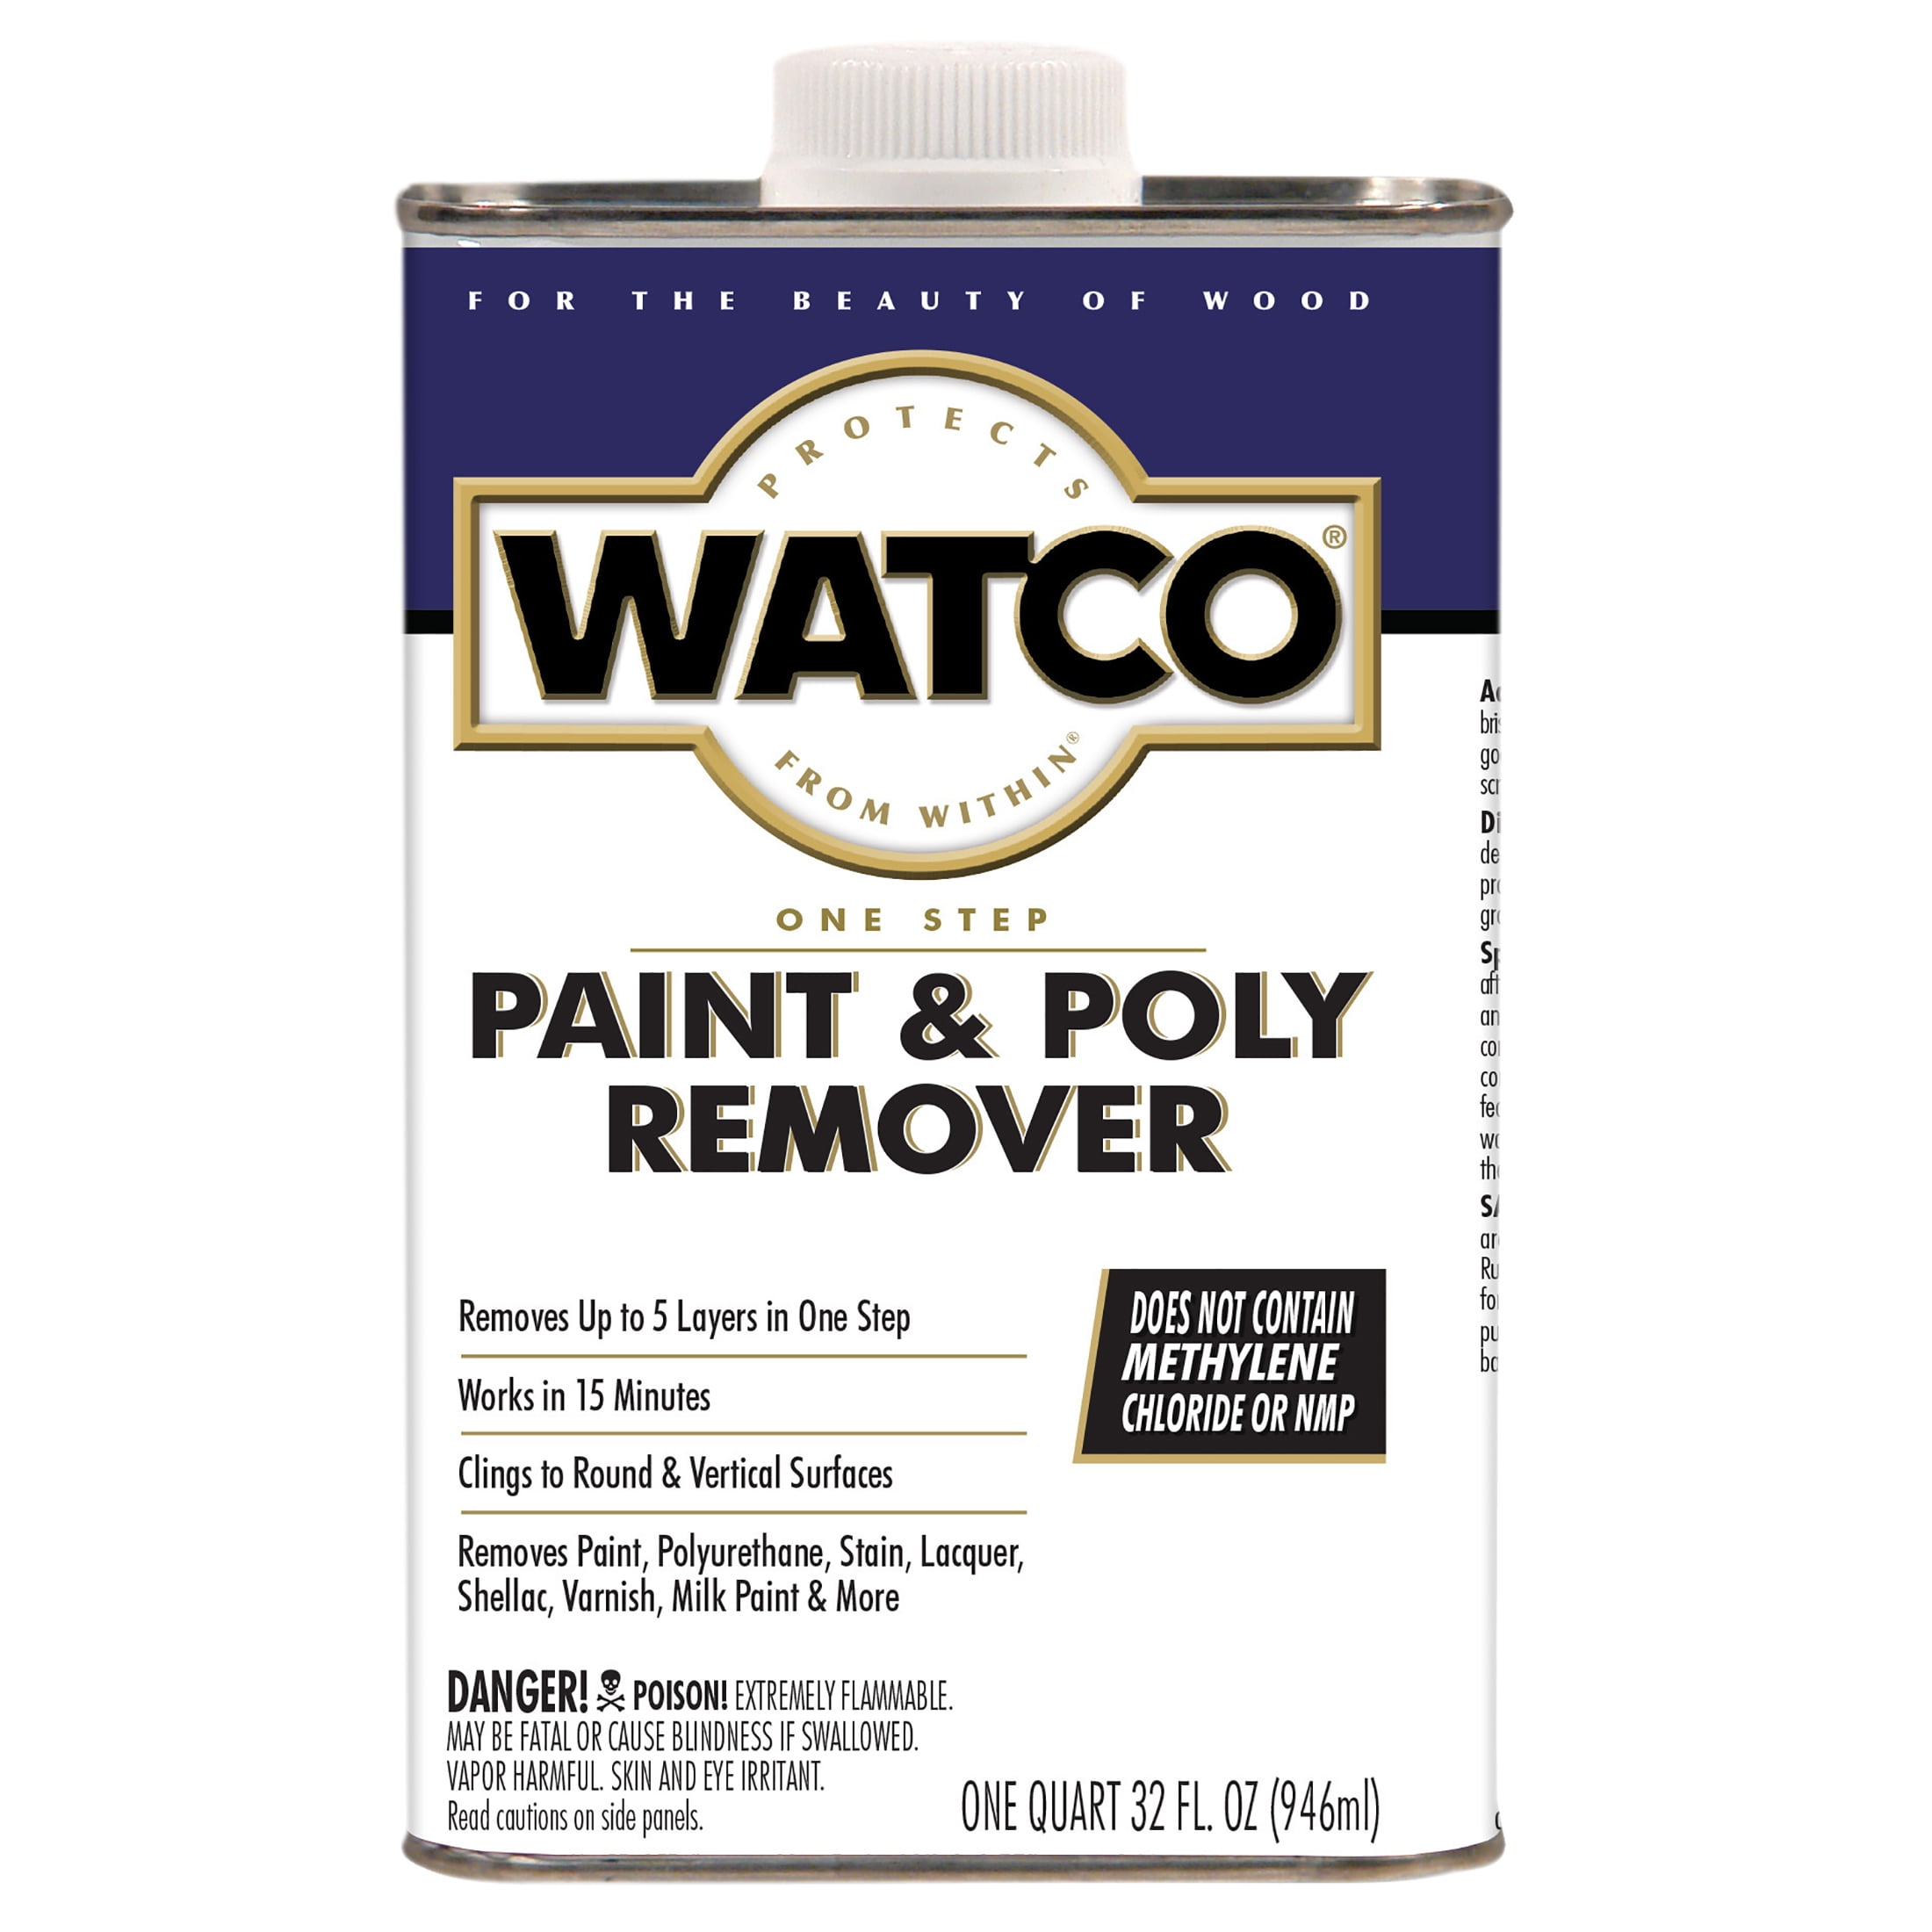 Rust-Oleum Watco One Step Paint & Poly Remover-351926, Quart